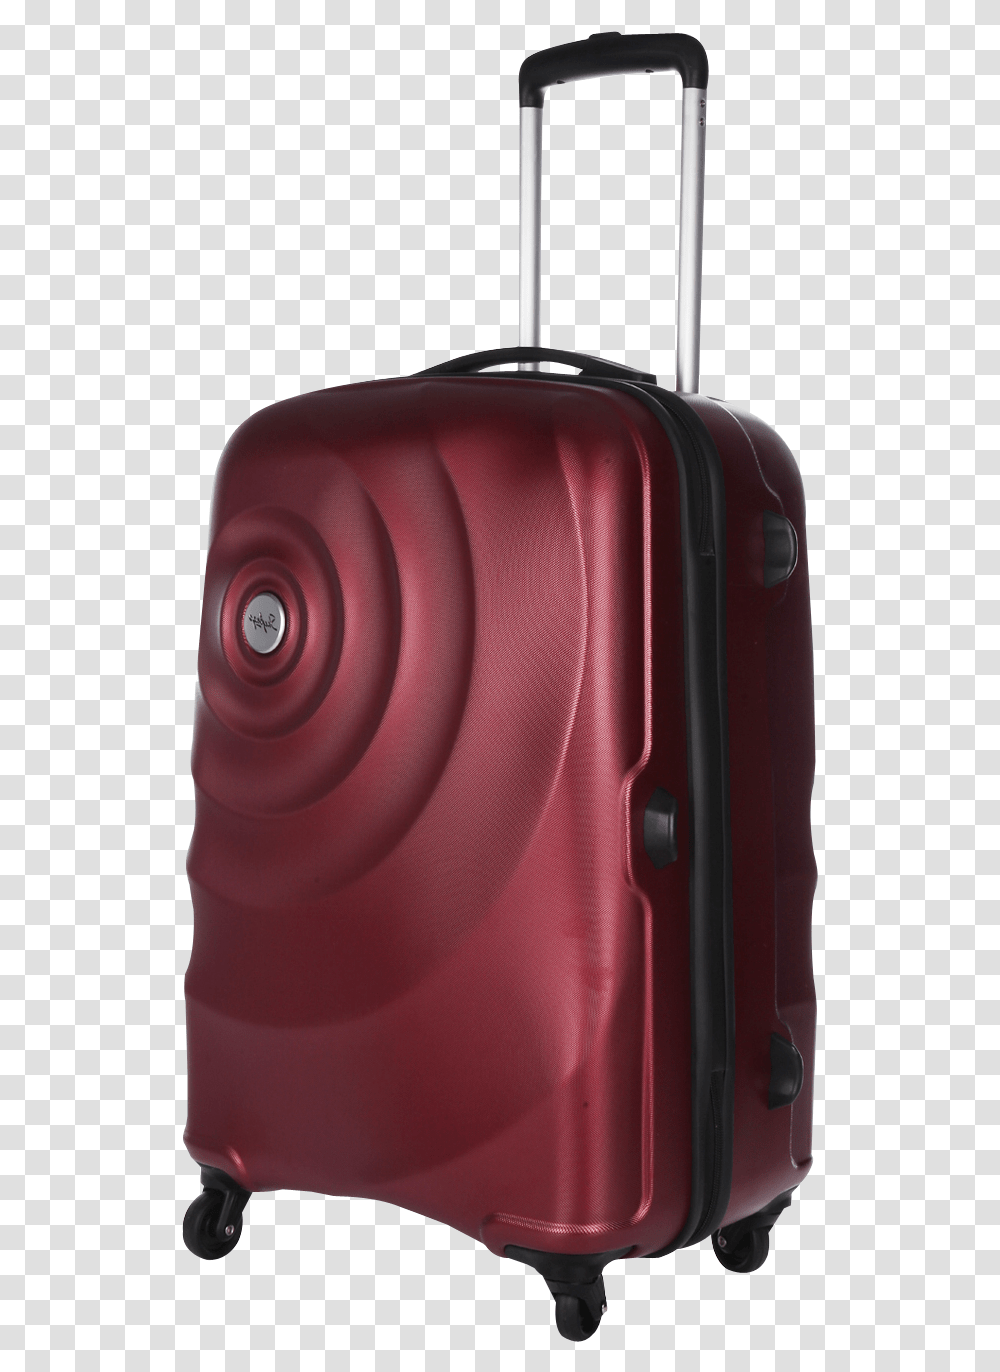 Strolley Bag Image Trolly Bag, Luggage, Suitcase, Electronics Transparent Png